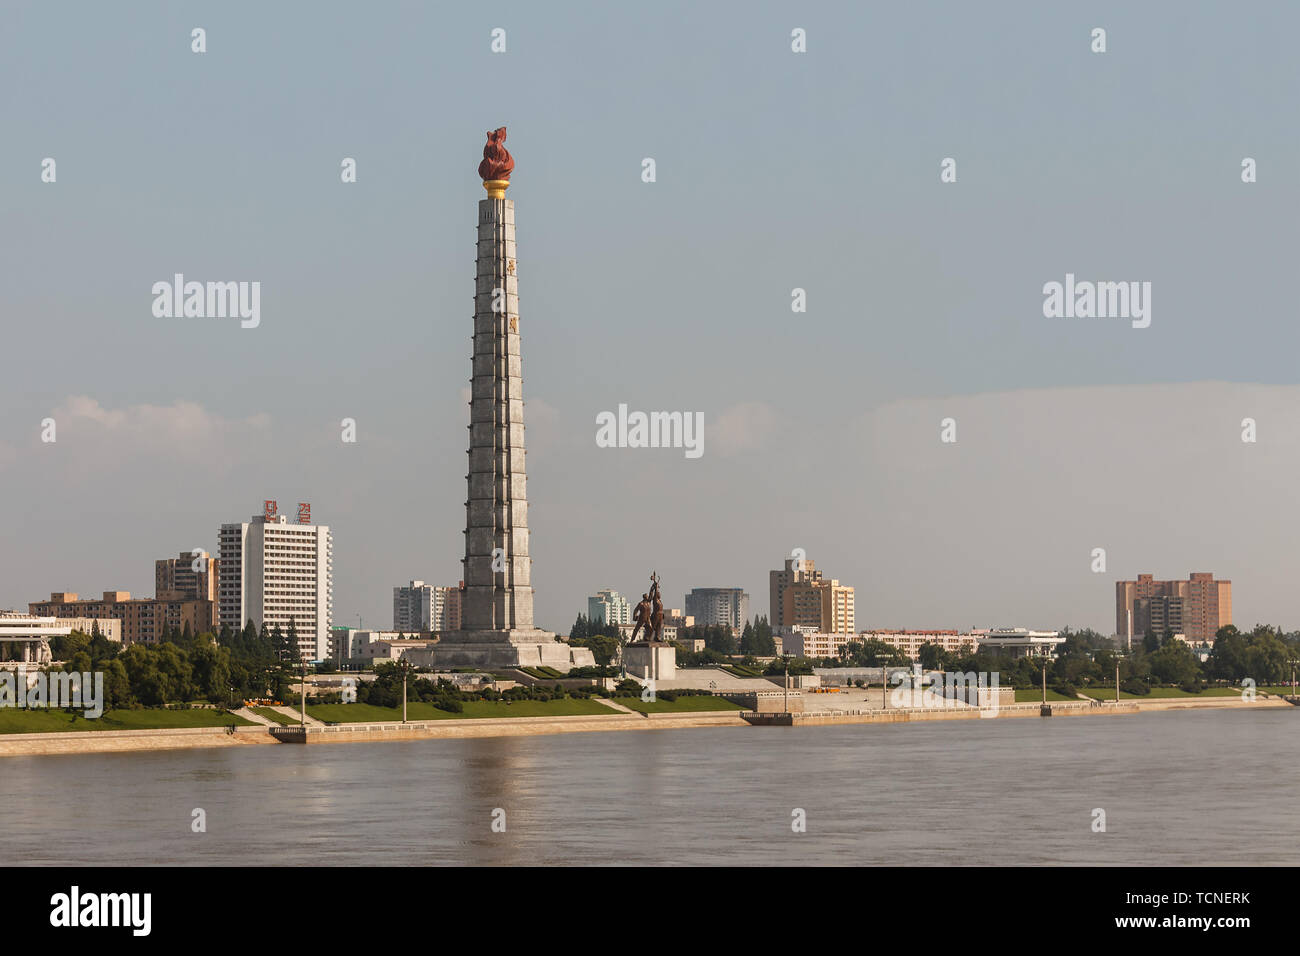 Pyongyang, North Korea - July 27, 2019: Monument to the Juche idea, Tower of the Juche Ideology in the Pyongyang and Taedong River. Stock Photo